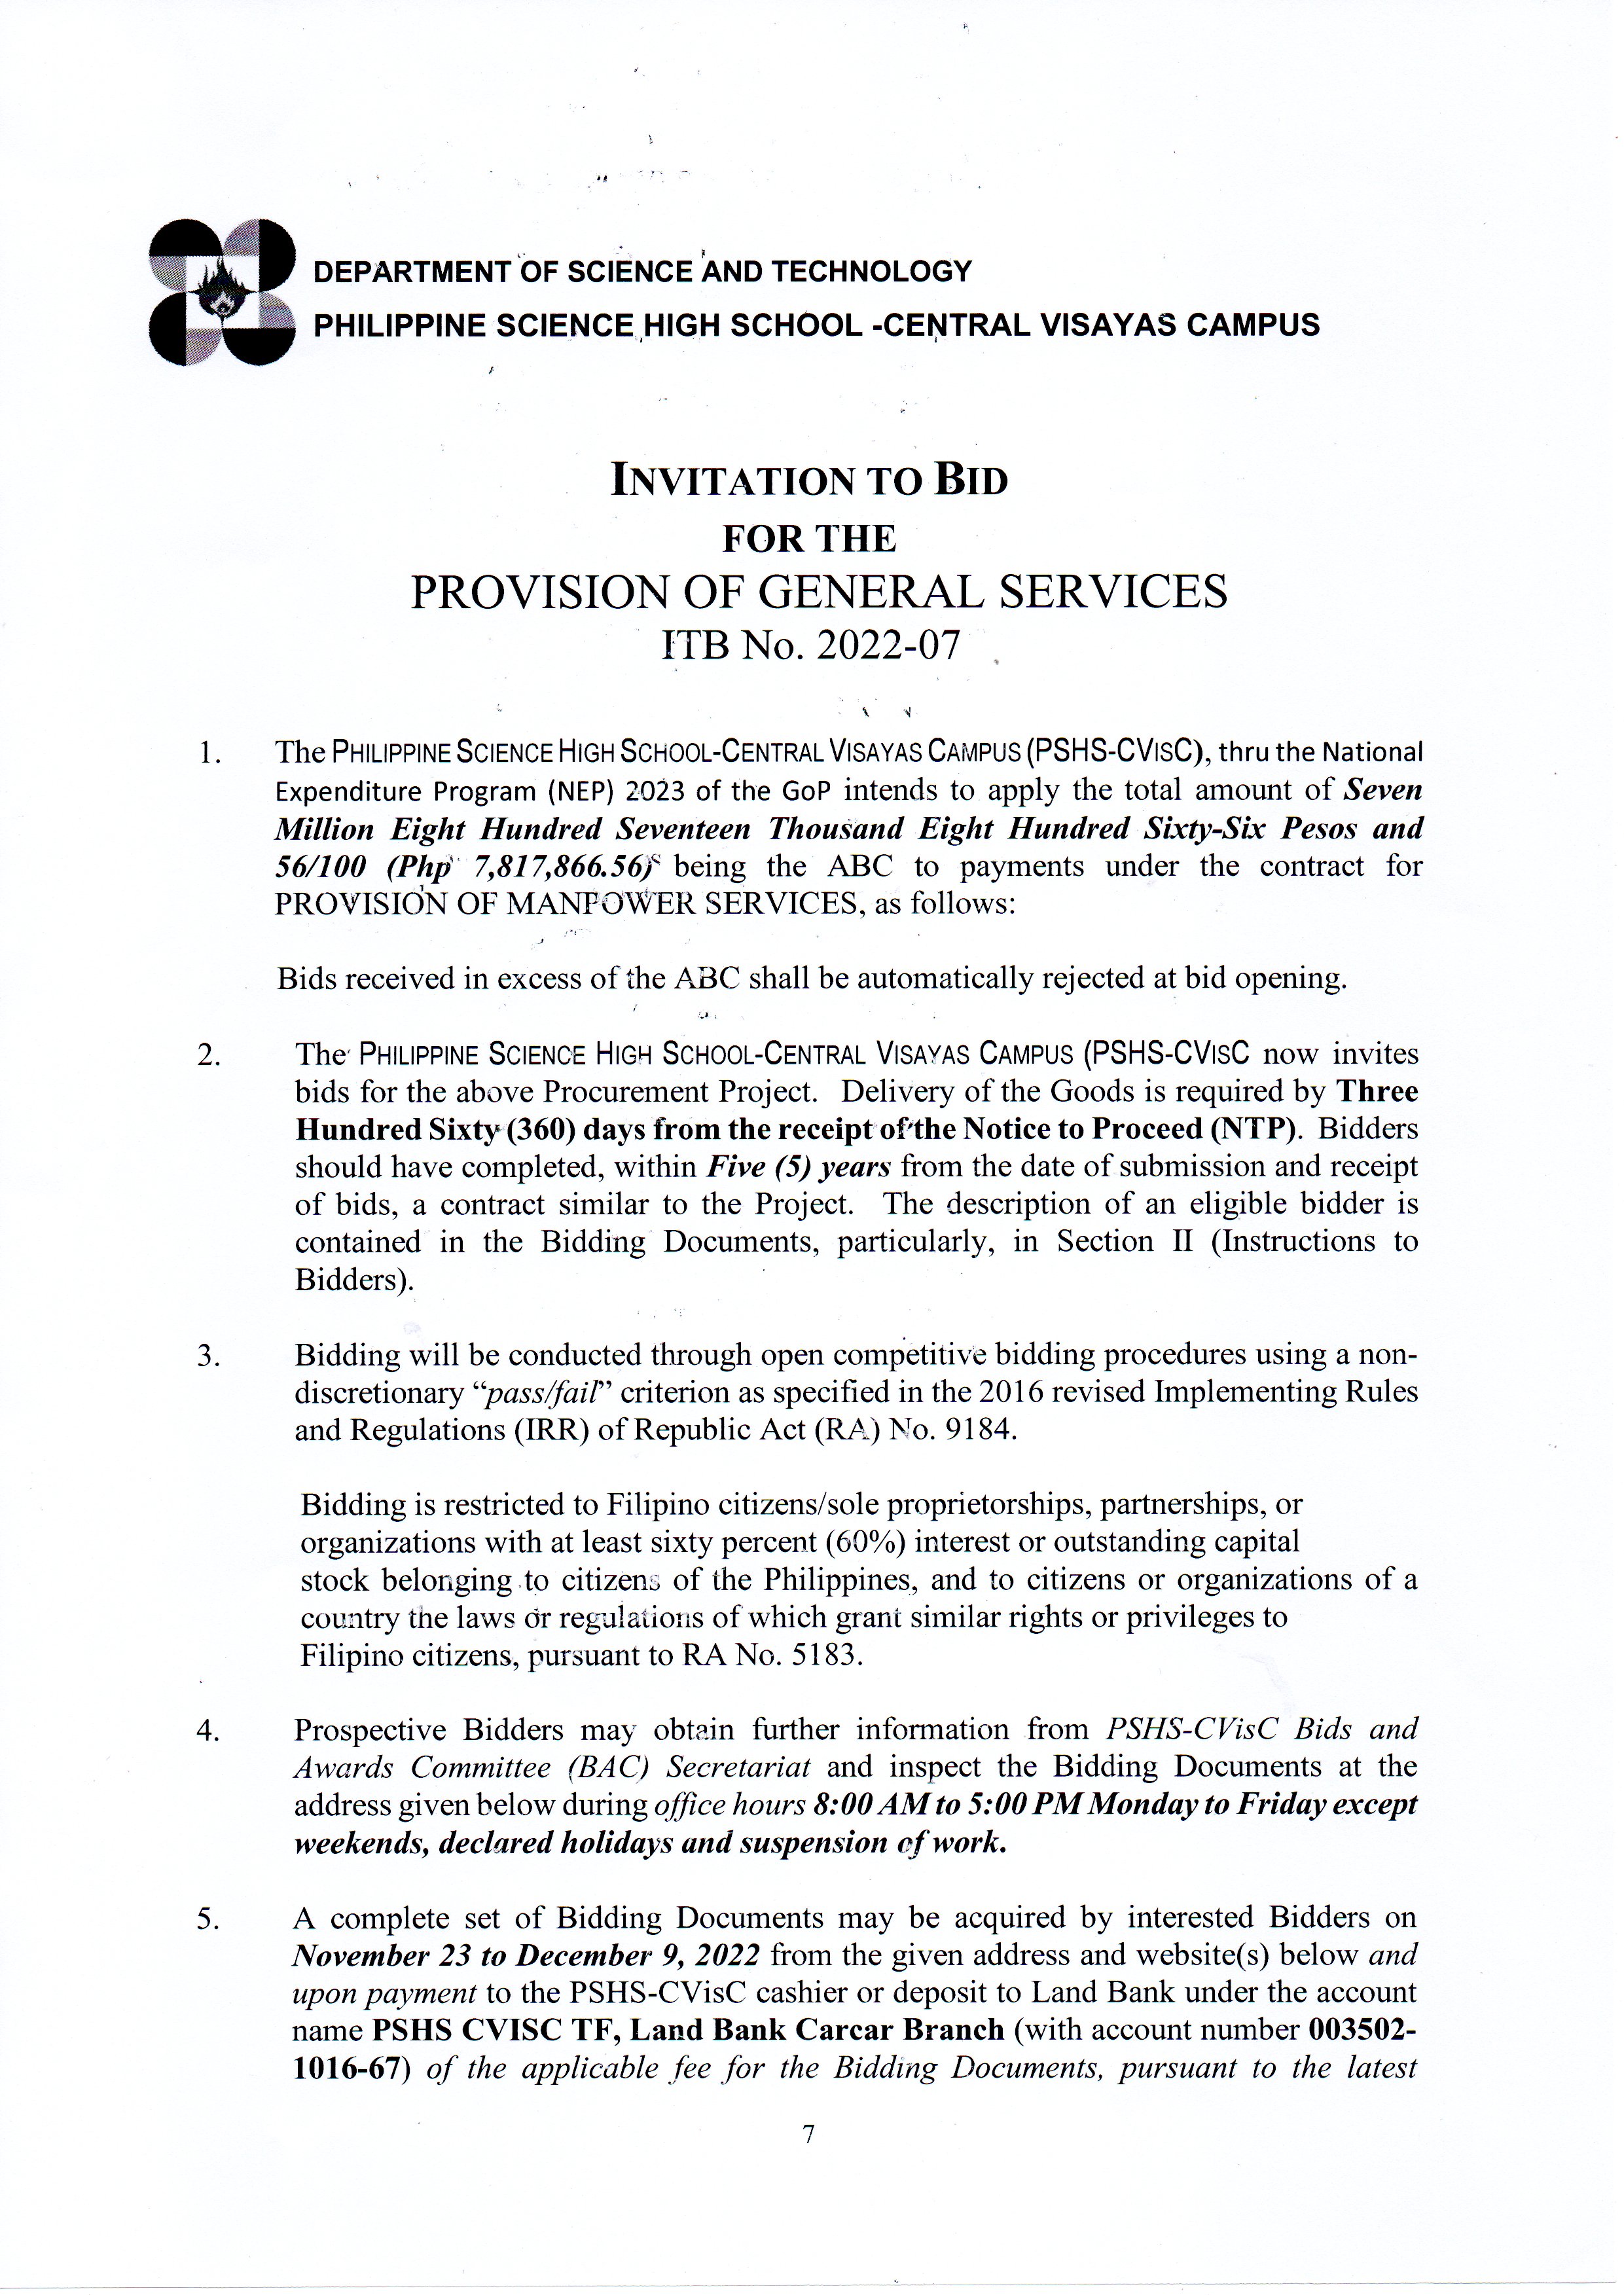 itb provision general services p1of2